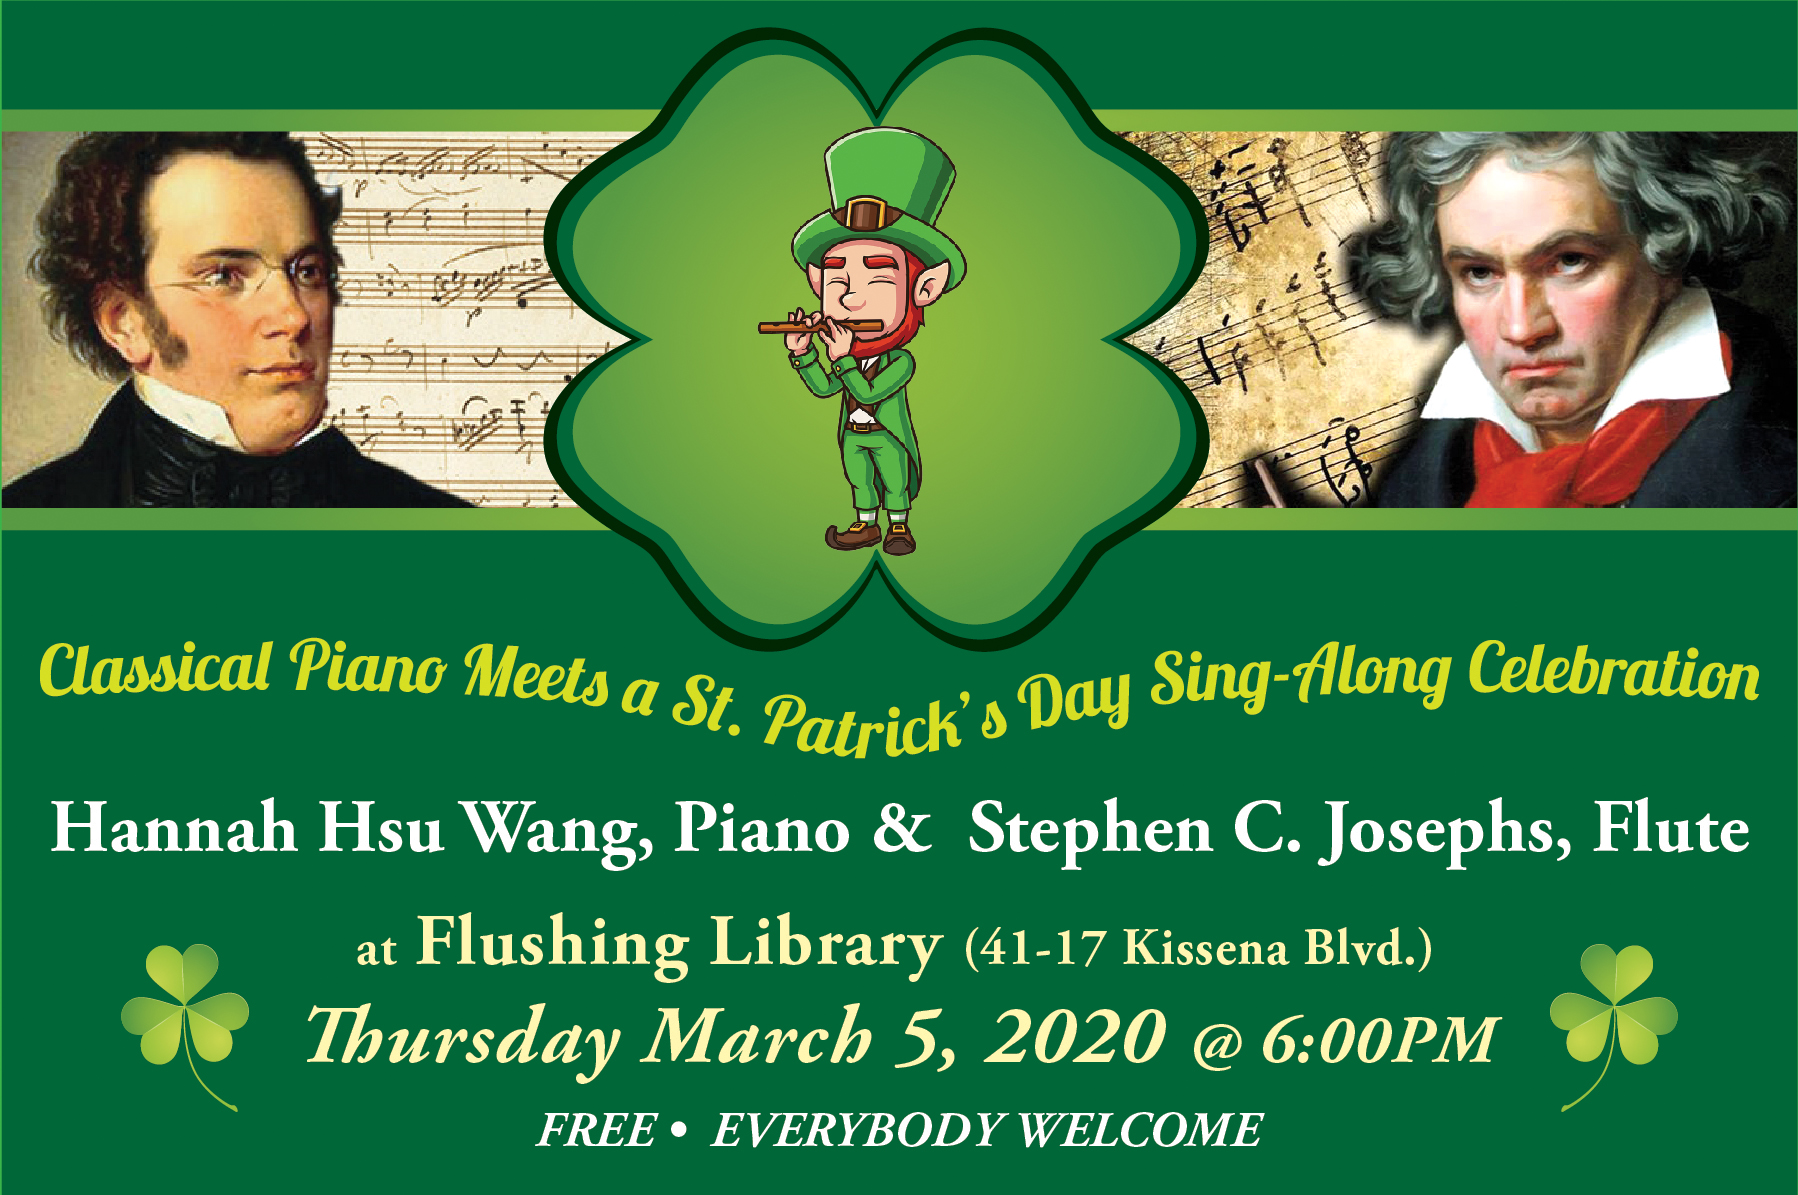 171. Classical Piano Meets a St.Patrick's Day Sing Along Celebration/03/05/2020